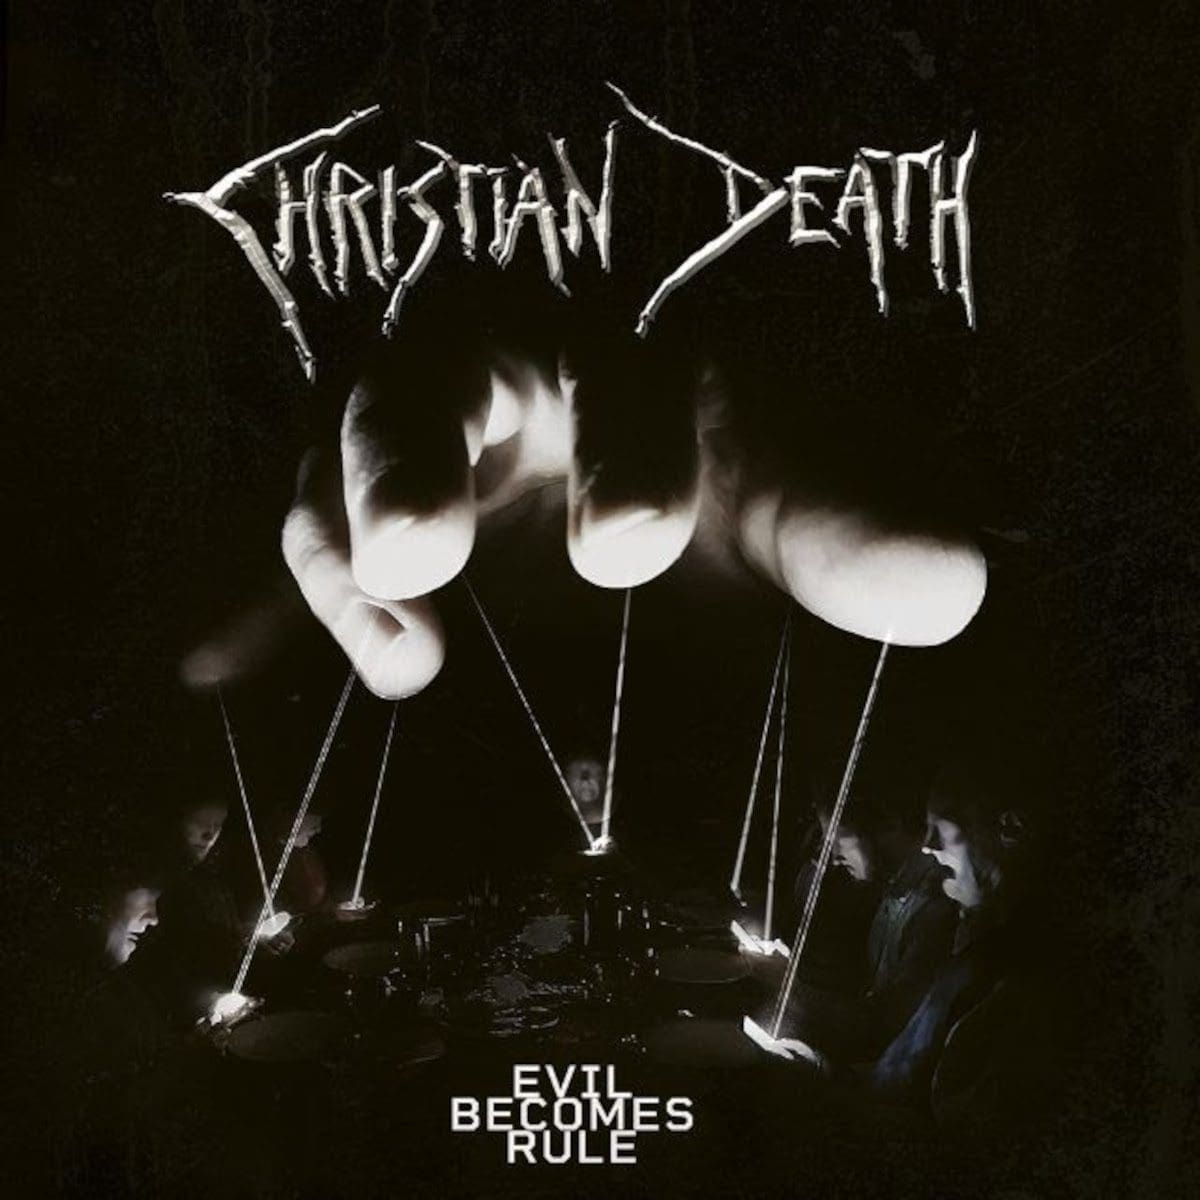 Video for debut single from new Christian Death album is out now: 'Blood Moon'